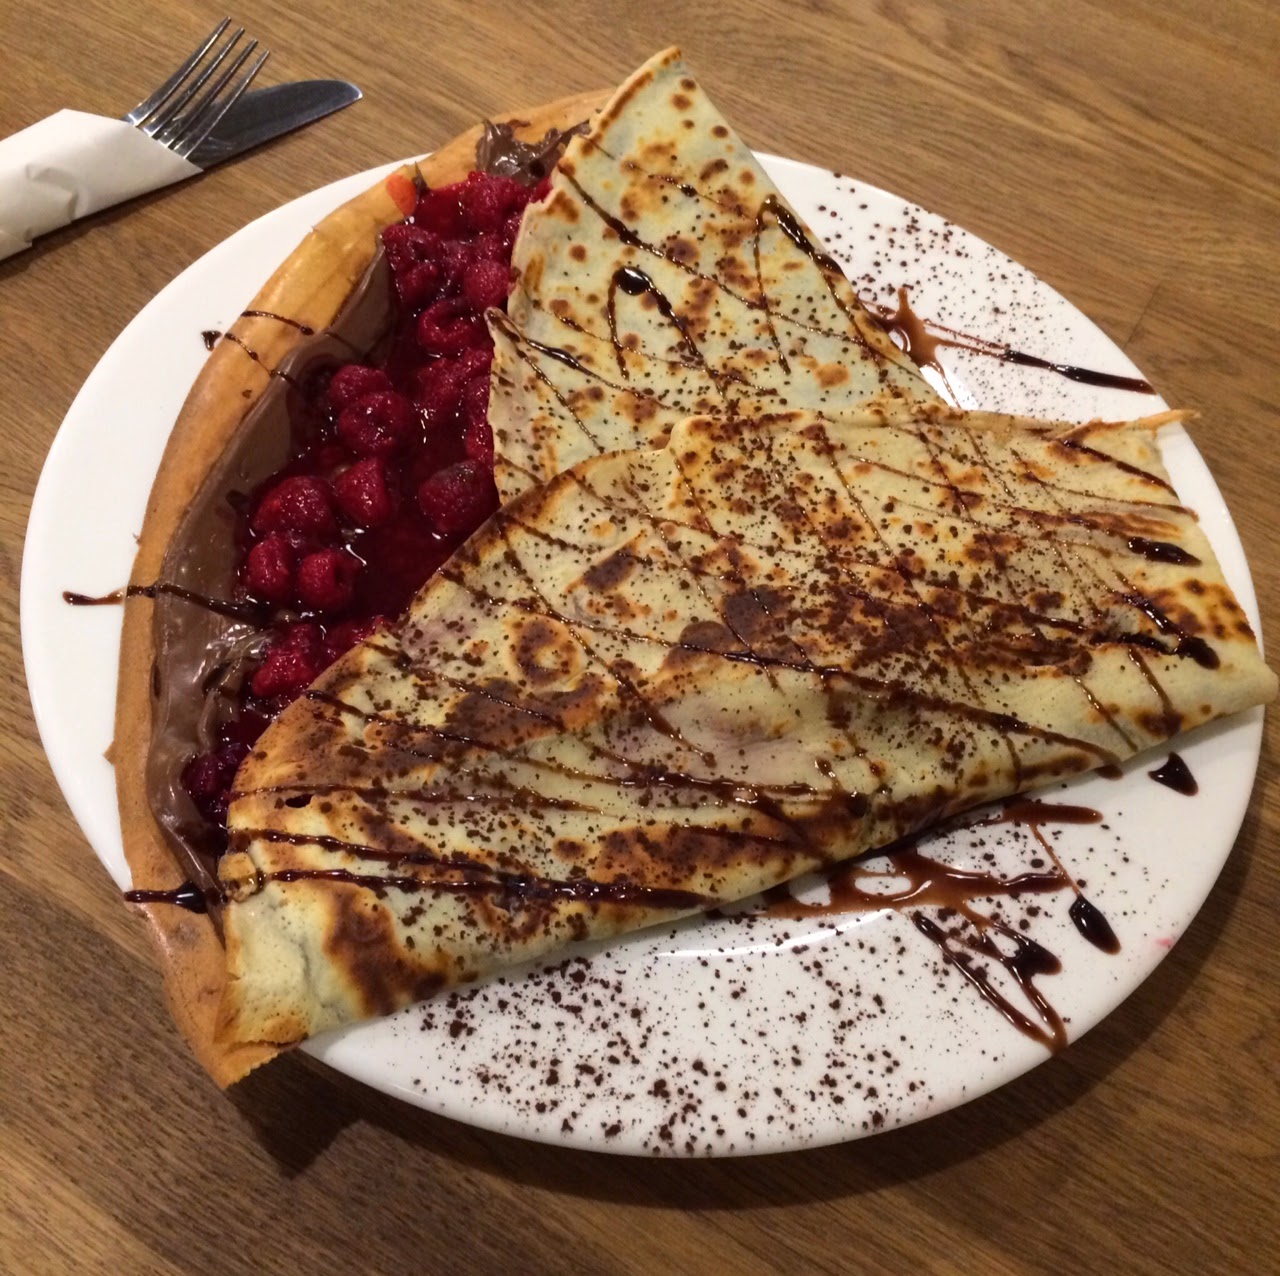 Crepe From Cacao 70 / カカオ 70 のクレープ ~ I'm Made of Sugar! - Chihiro's ...